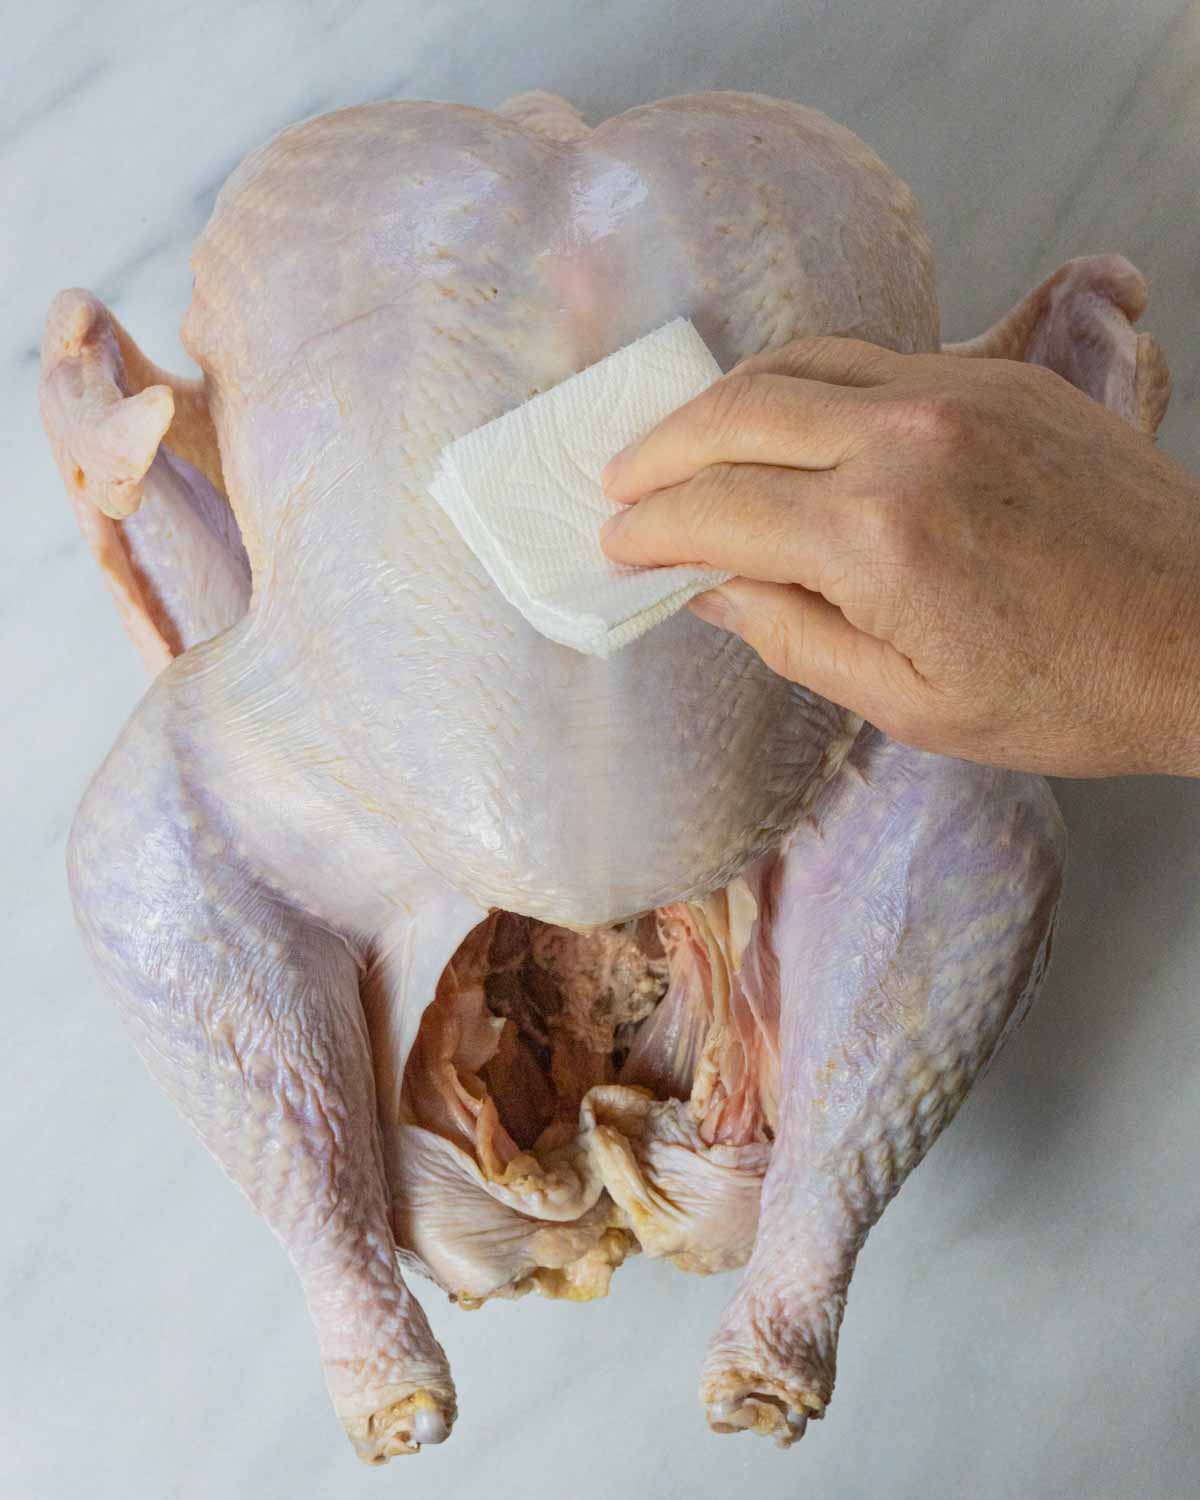 Patting dry raw whole turkey with a paper towel.